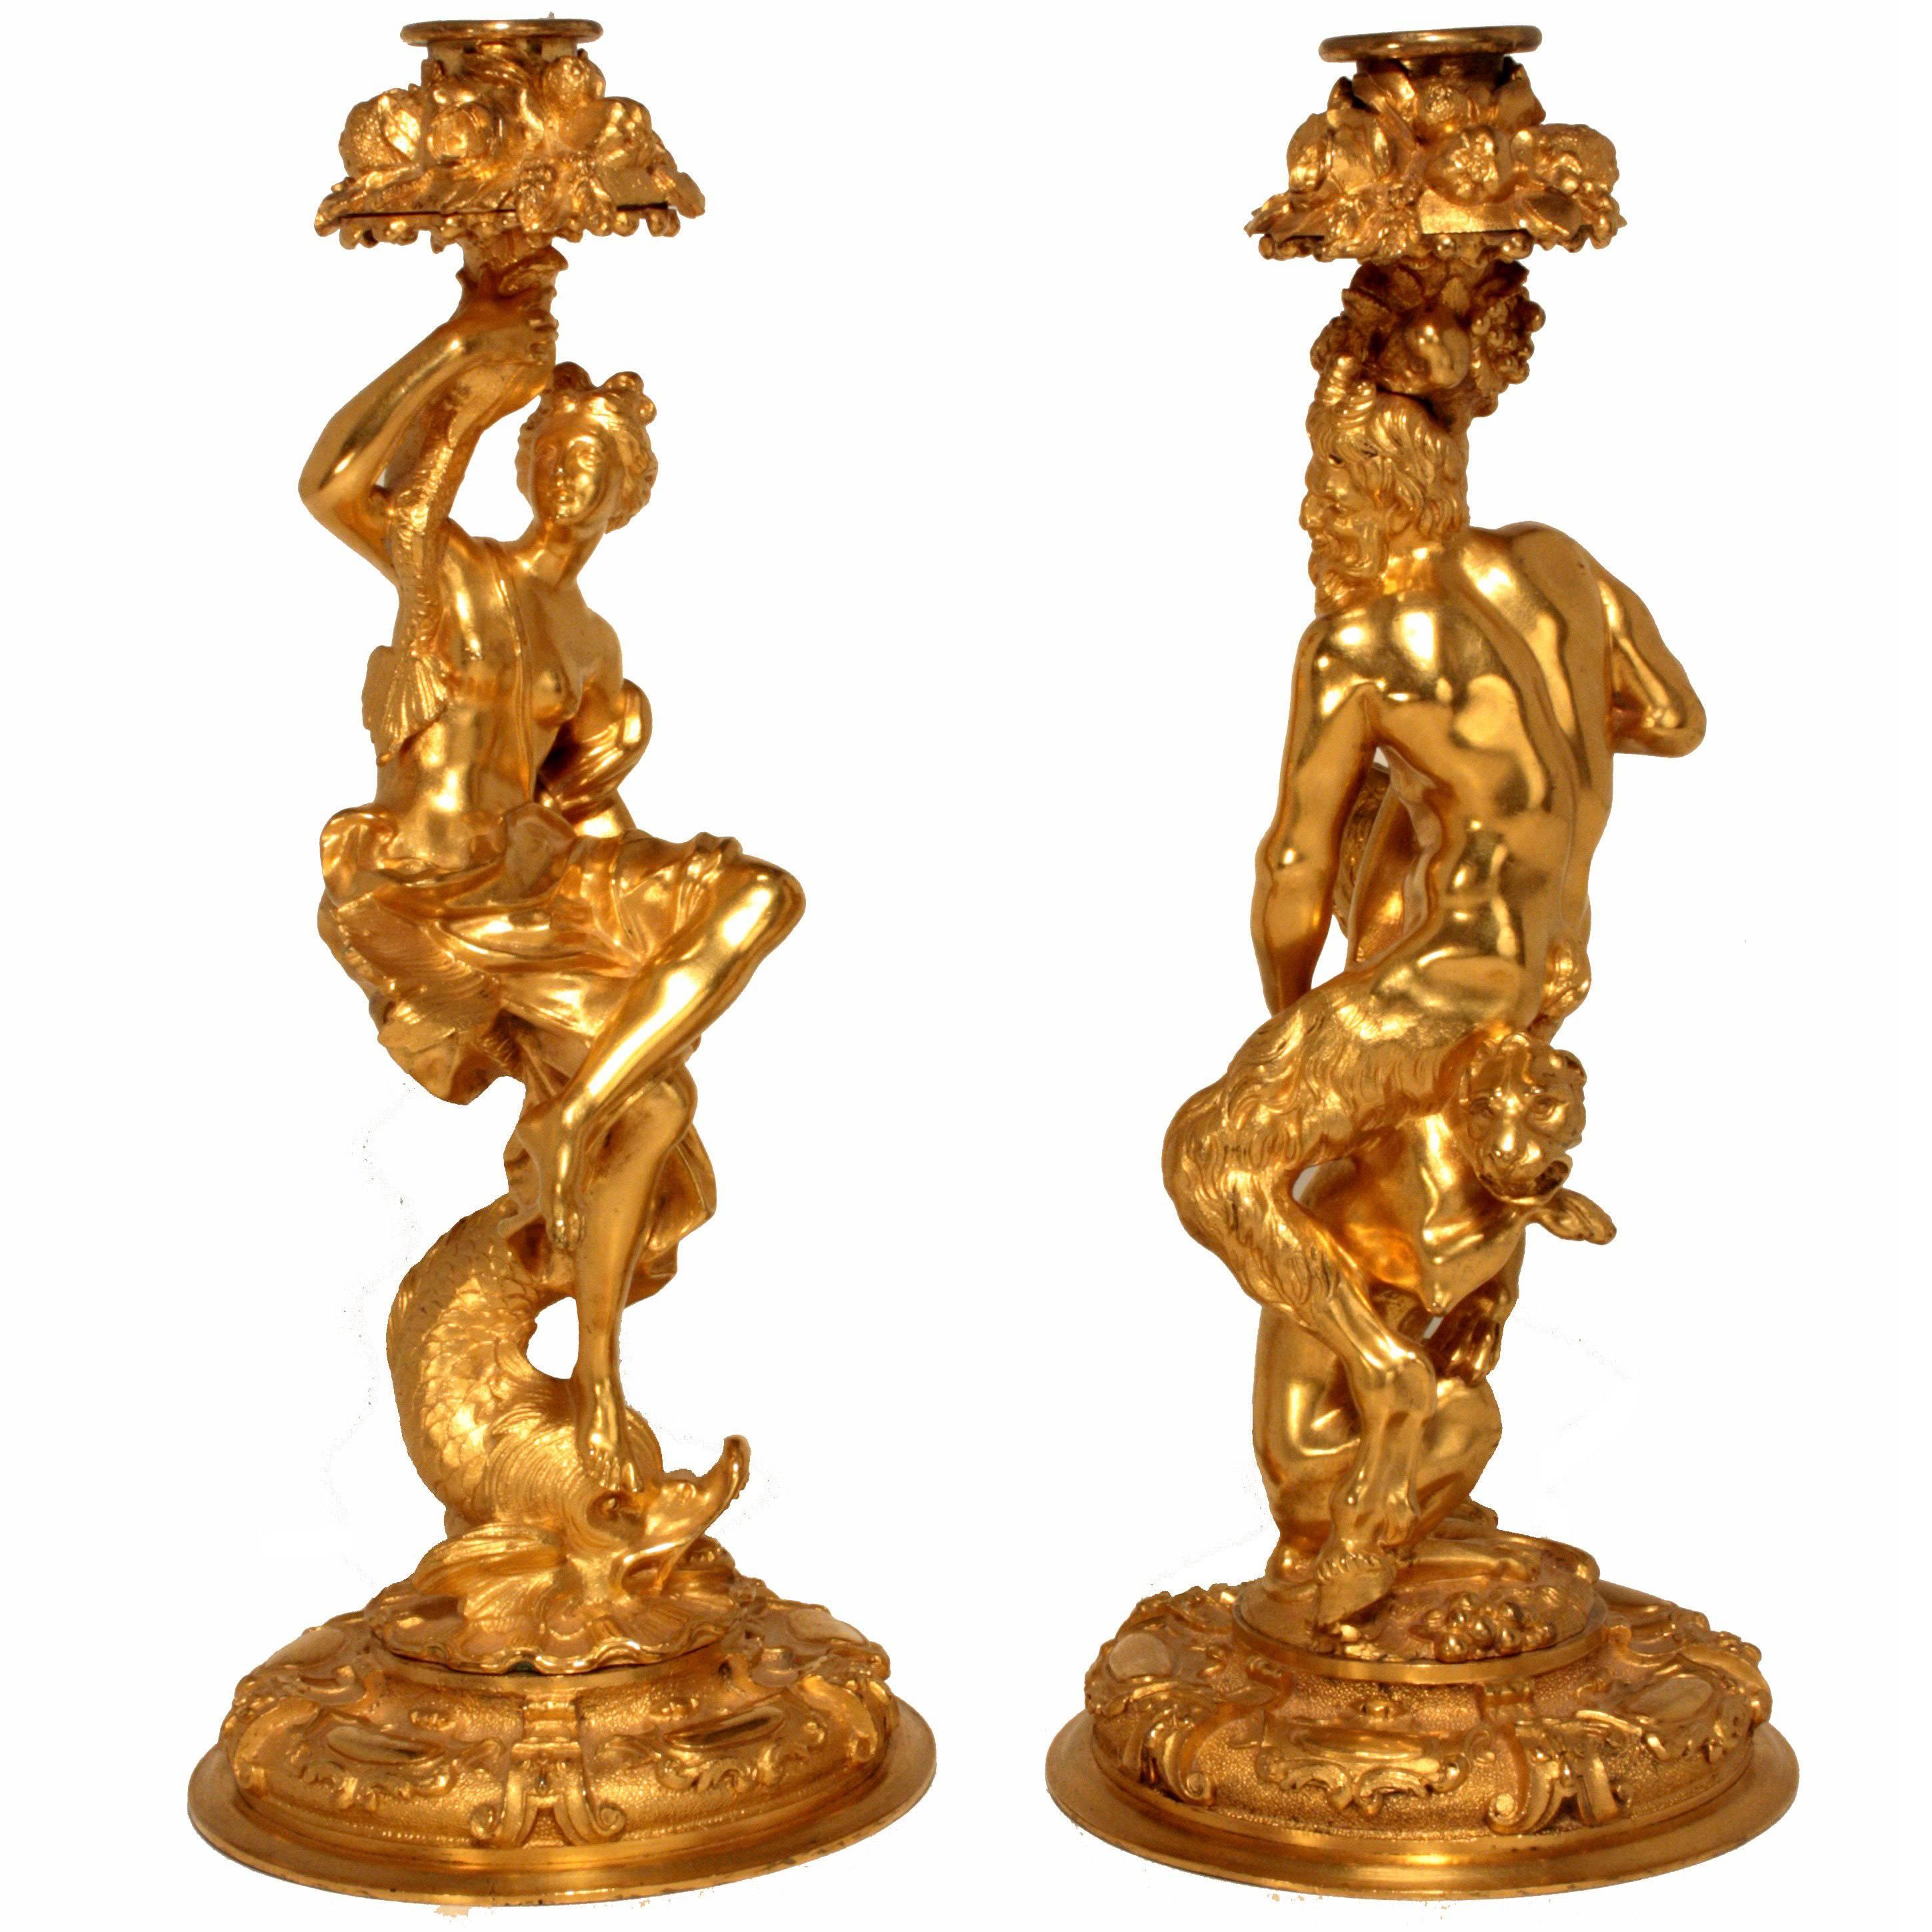 Pair of Antique French Gilt Bronze Figural Candlesticks